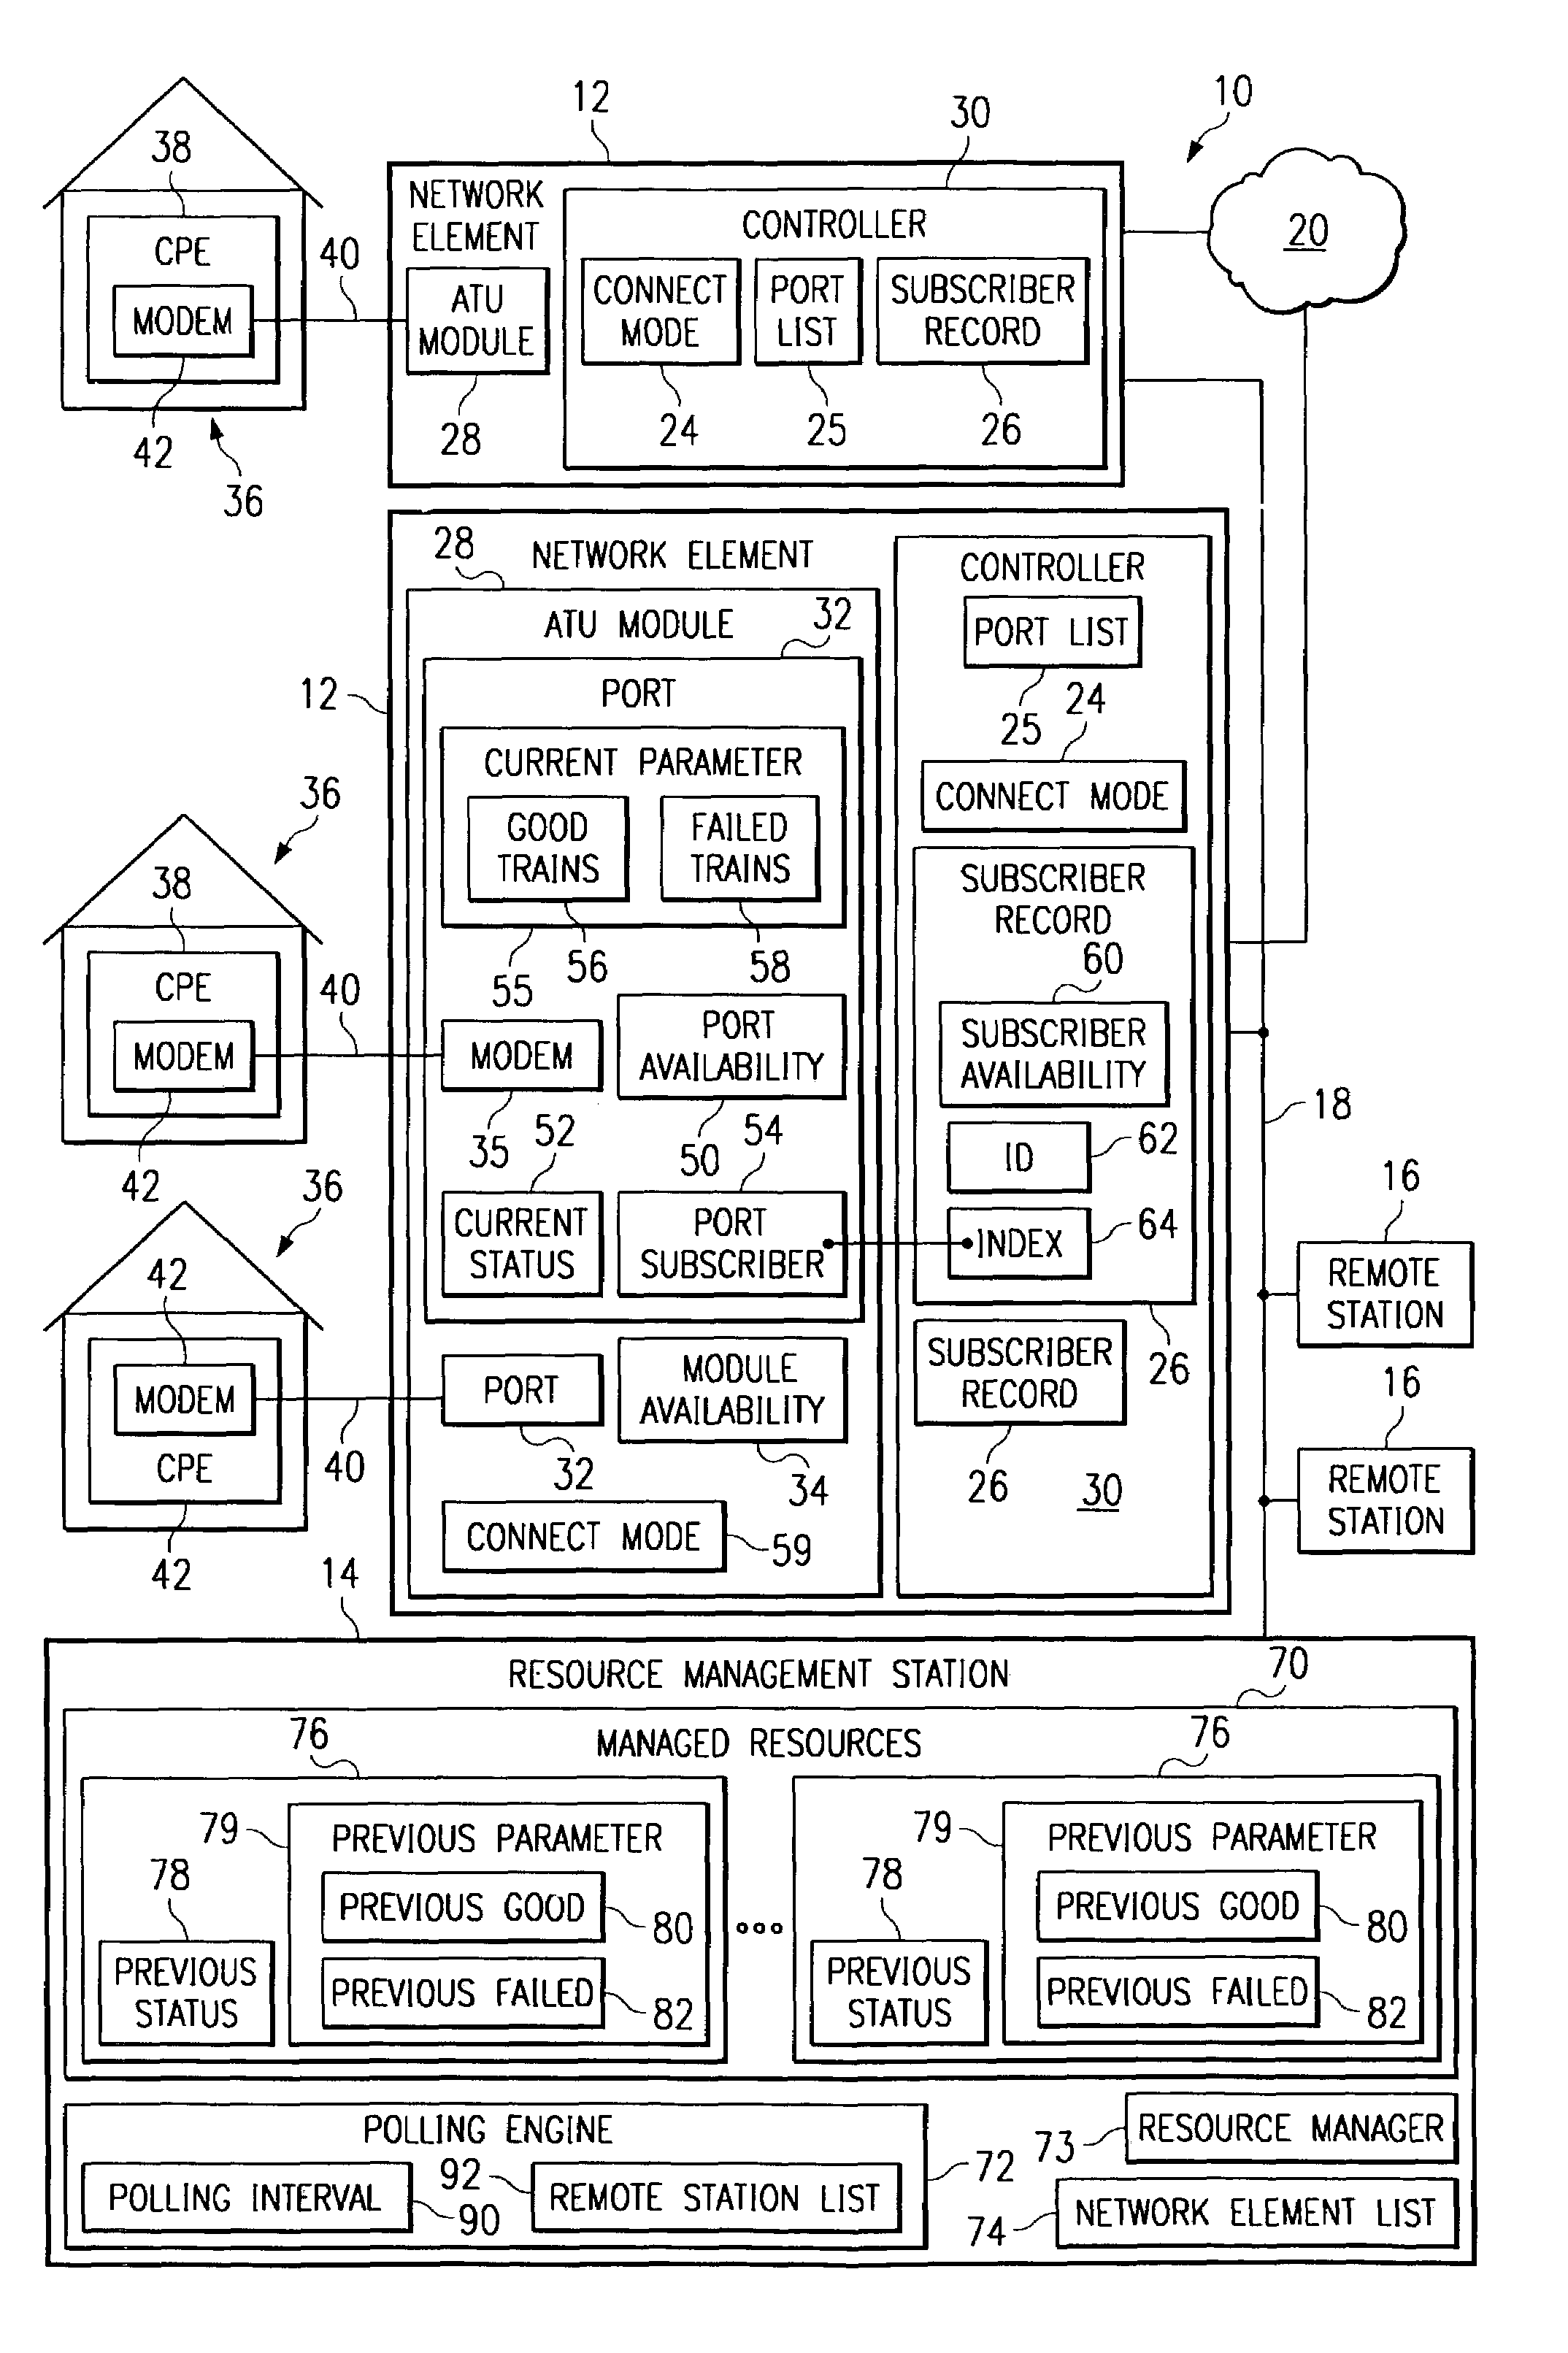 Method and system for managing remote resources in a telecommunications system